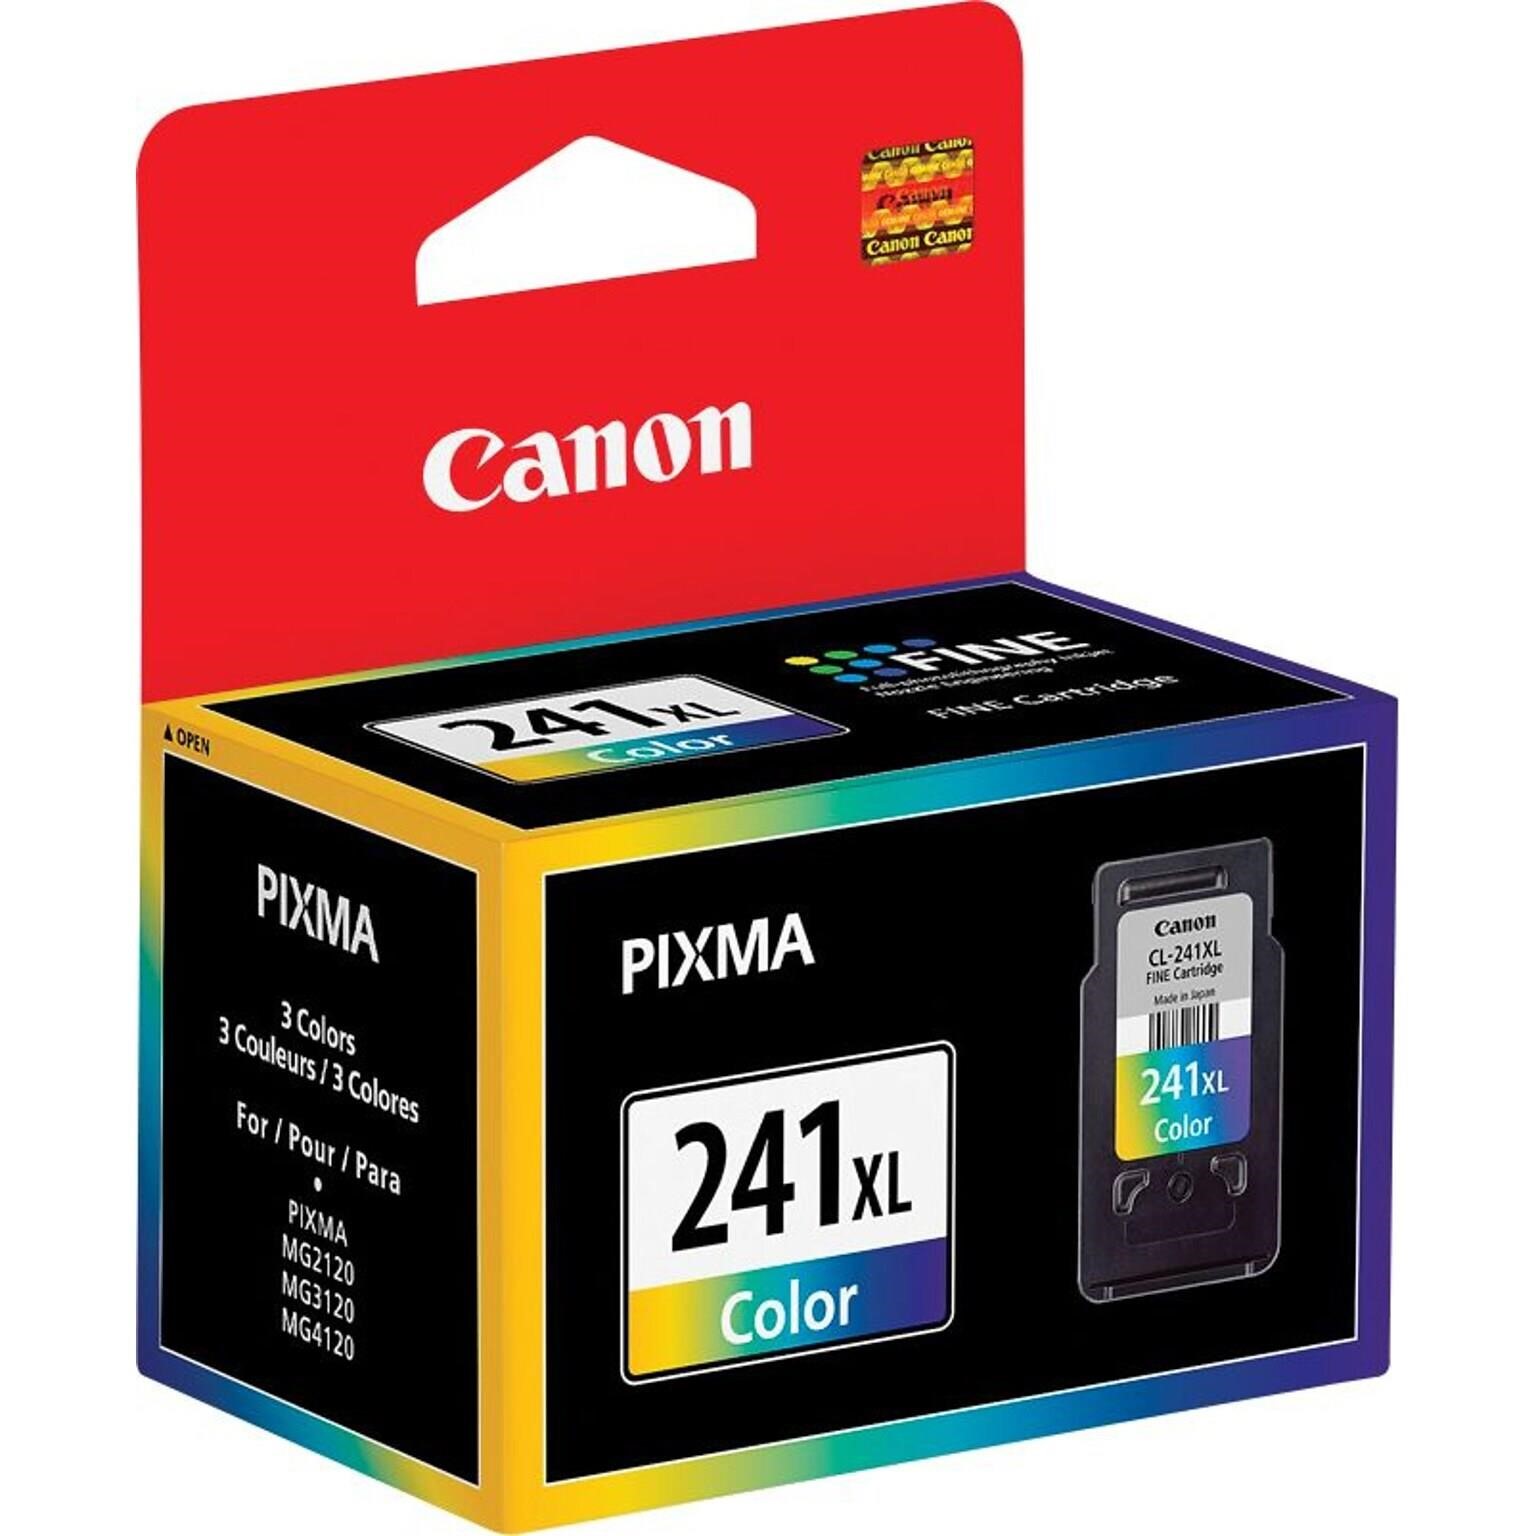 $40 Canon TriColor High Yield Ink Cartridge A100